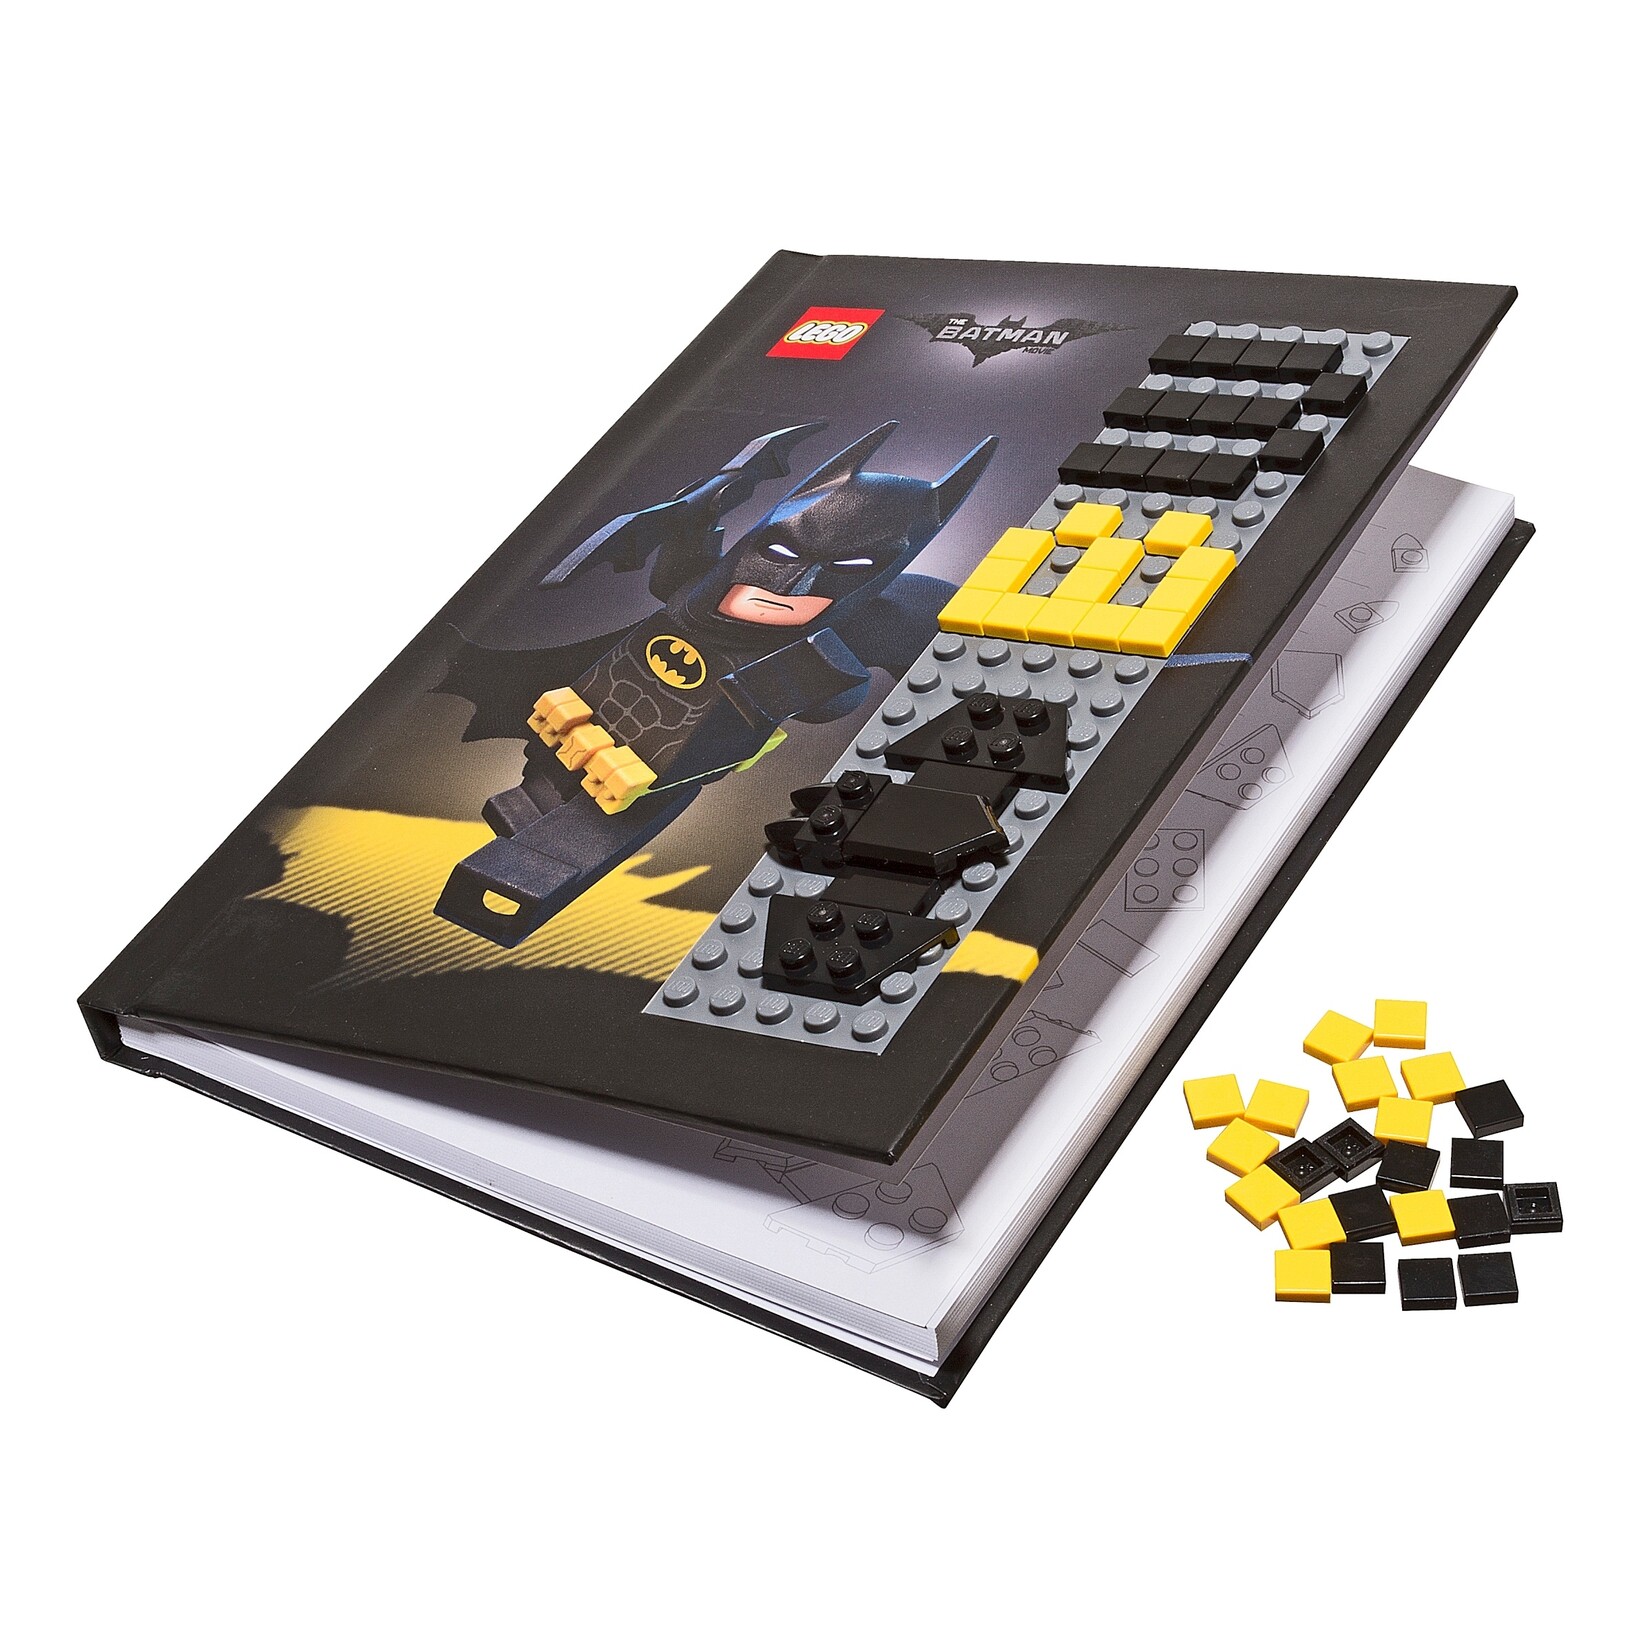 LEGO Batman Notebook with Stud Cover 853649